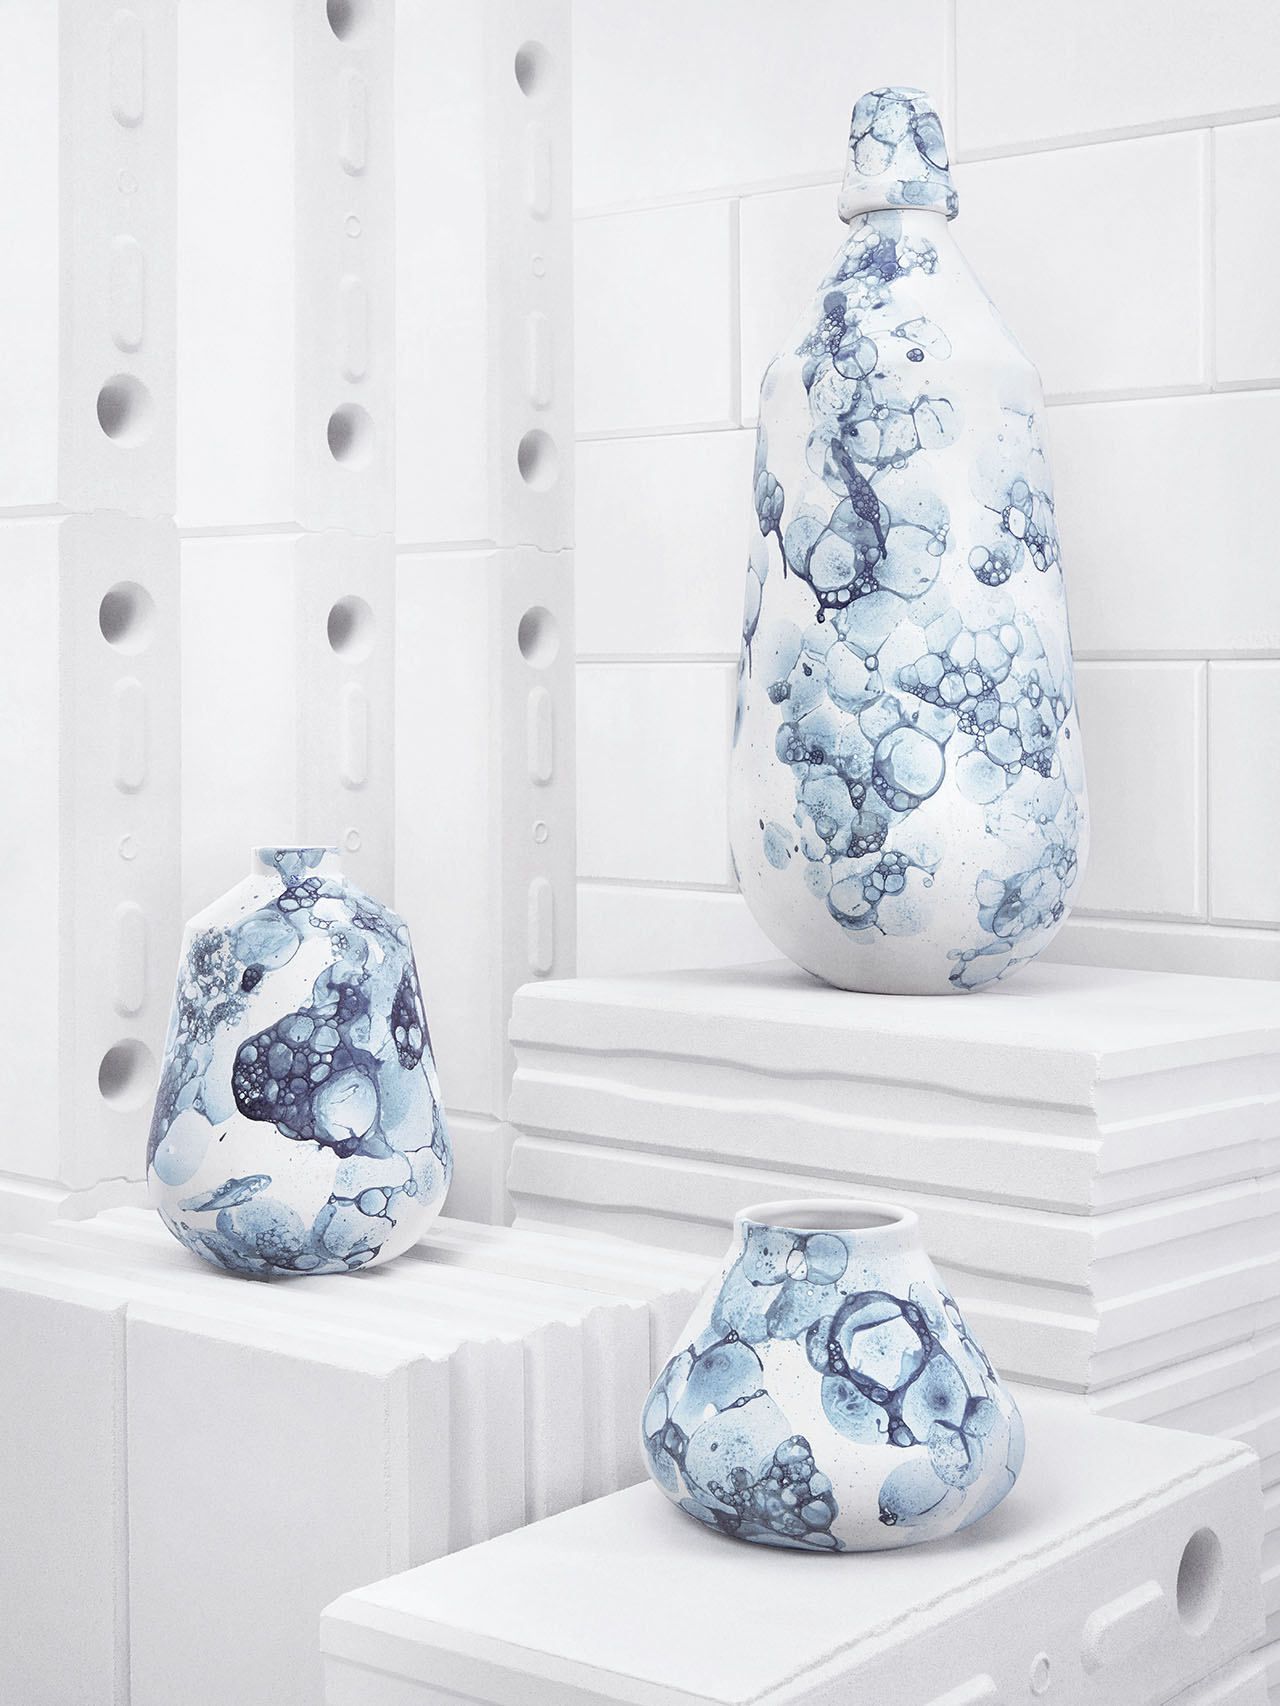 Bubblegraphy series of vases by Adrianus Kundert in collaboration with Thomas van der Sman for Oddness.  The pattern on each vase is created by a special process of blowing air bubbles in the glaze. Photo © Oddness.